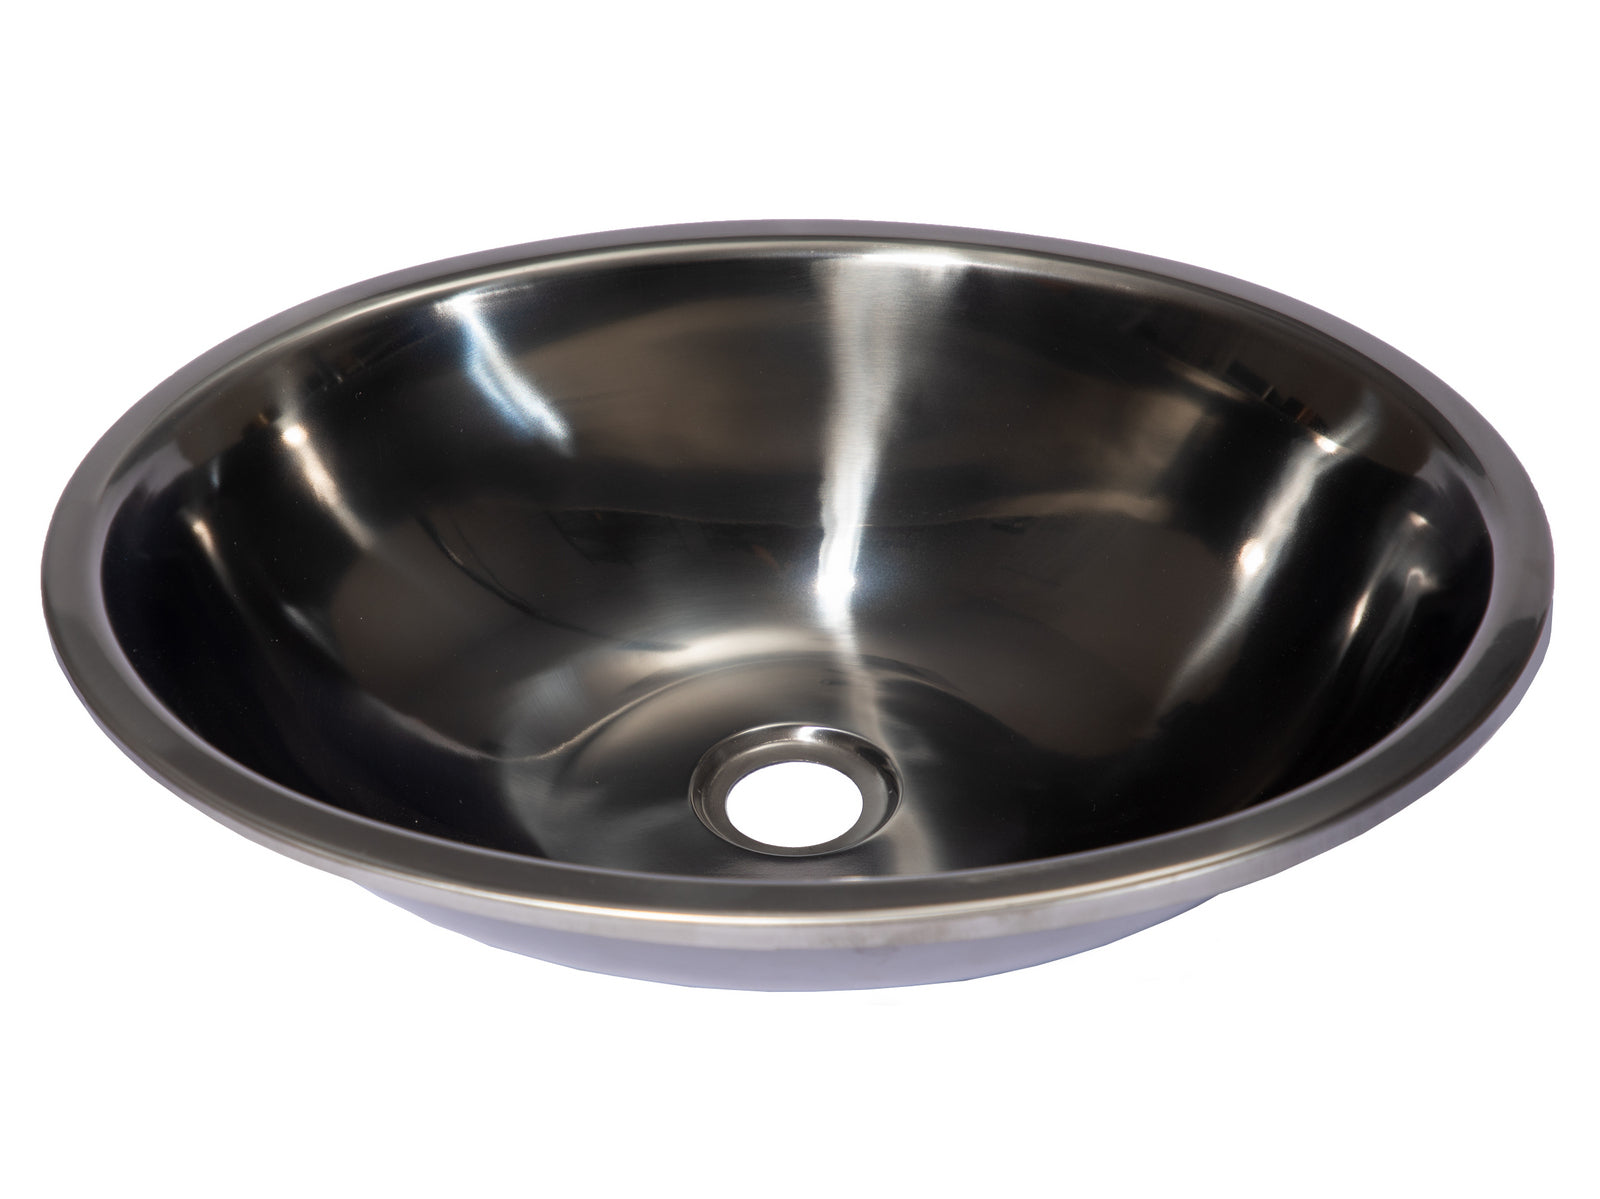 Oval 17 1/2" x 14" Top Mount Stainless Steel Bathroom Sink with Drain in Black